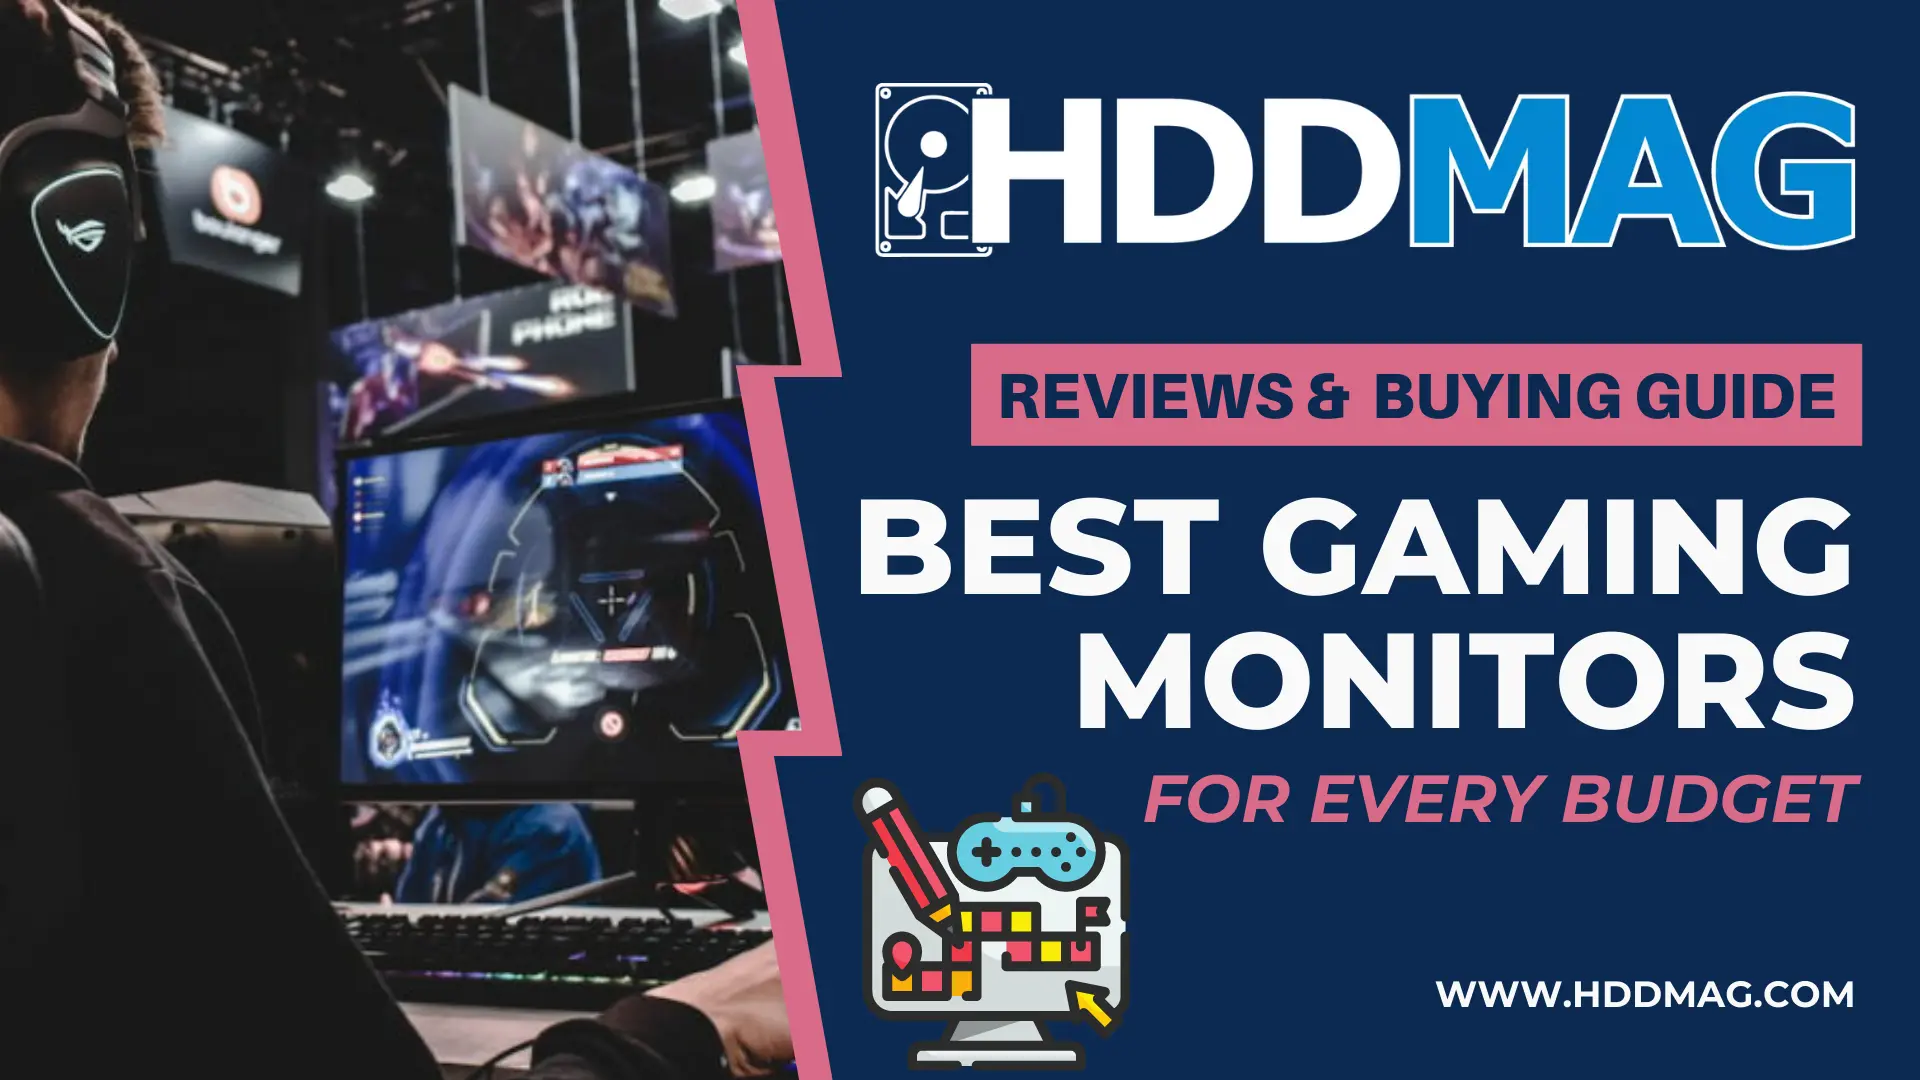 Best Budget Gaming Monitors Without Compromising the Quality